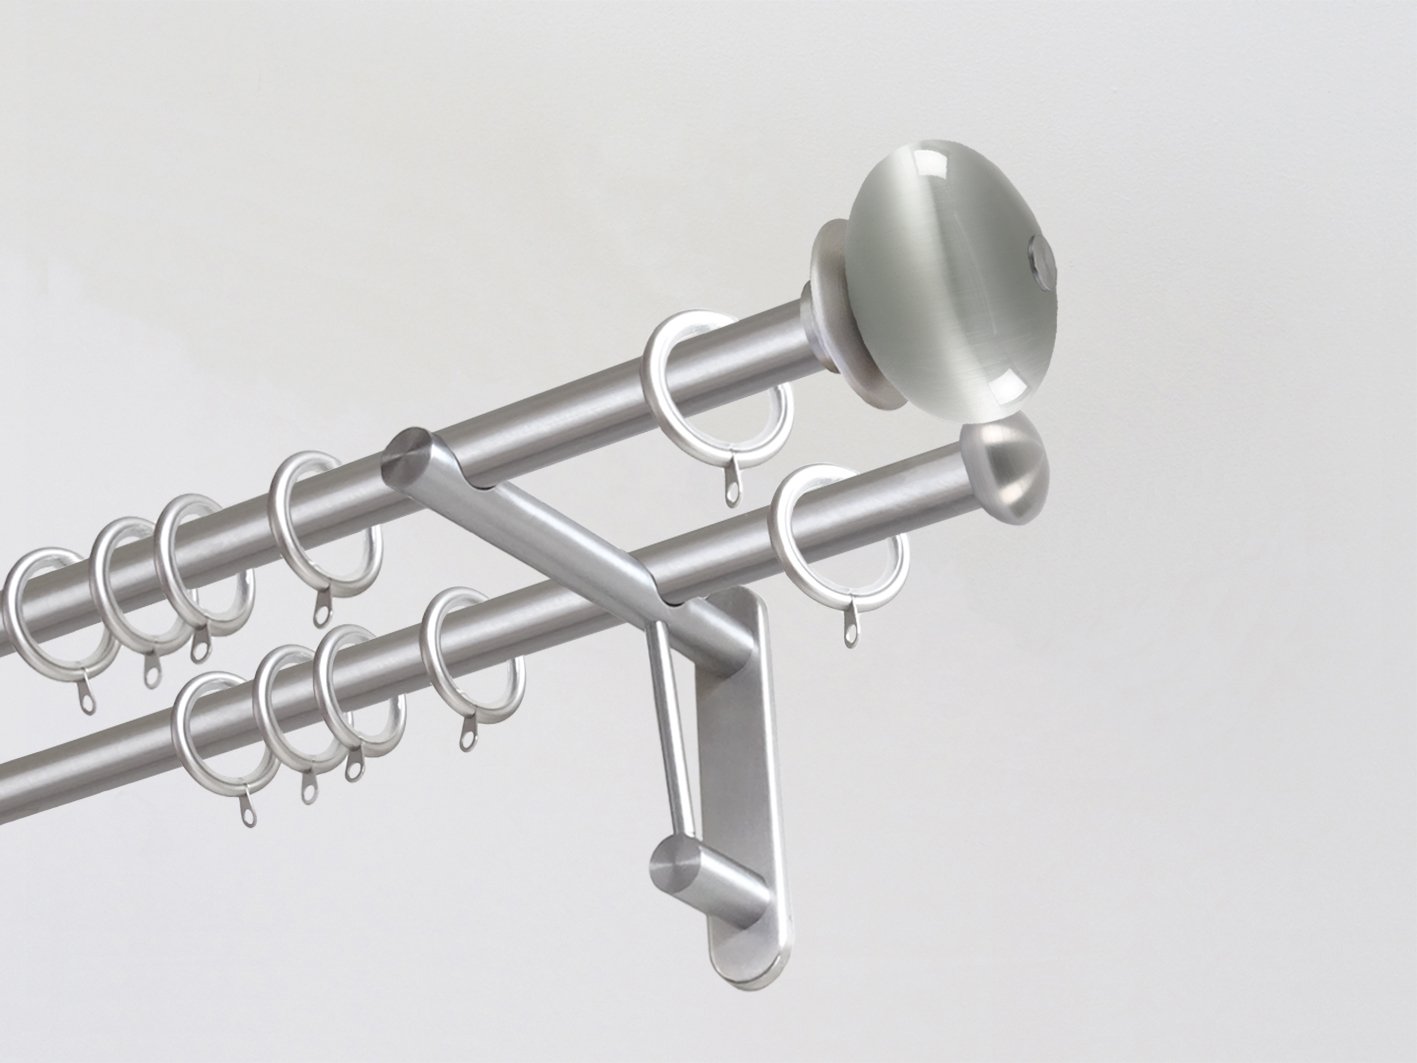 Double 19mm stainless steel curtain pole duo system set with glass moonstone finials in cloud